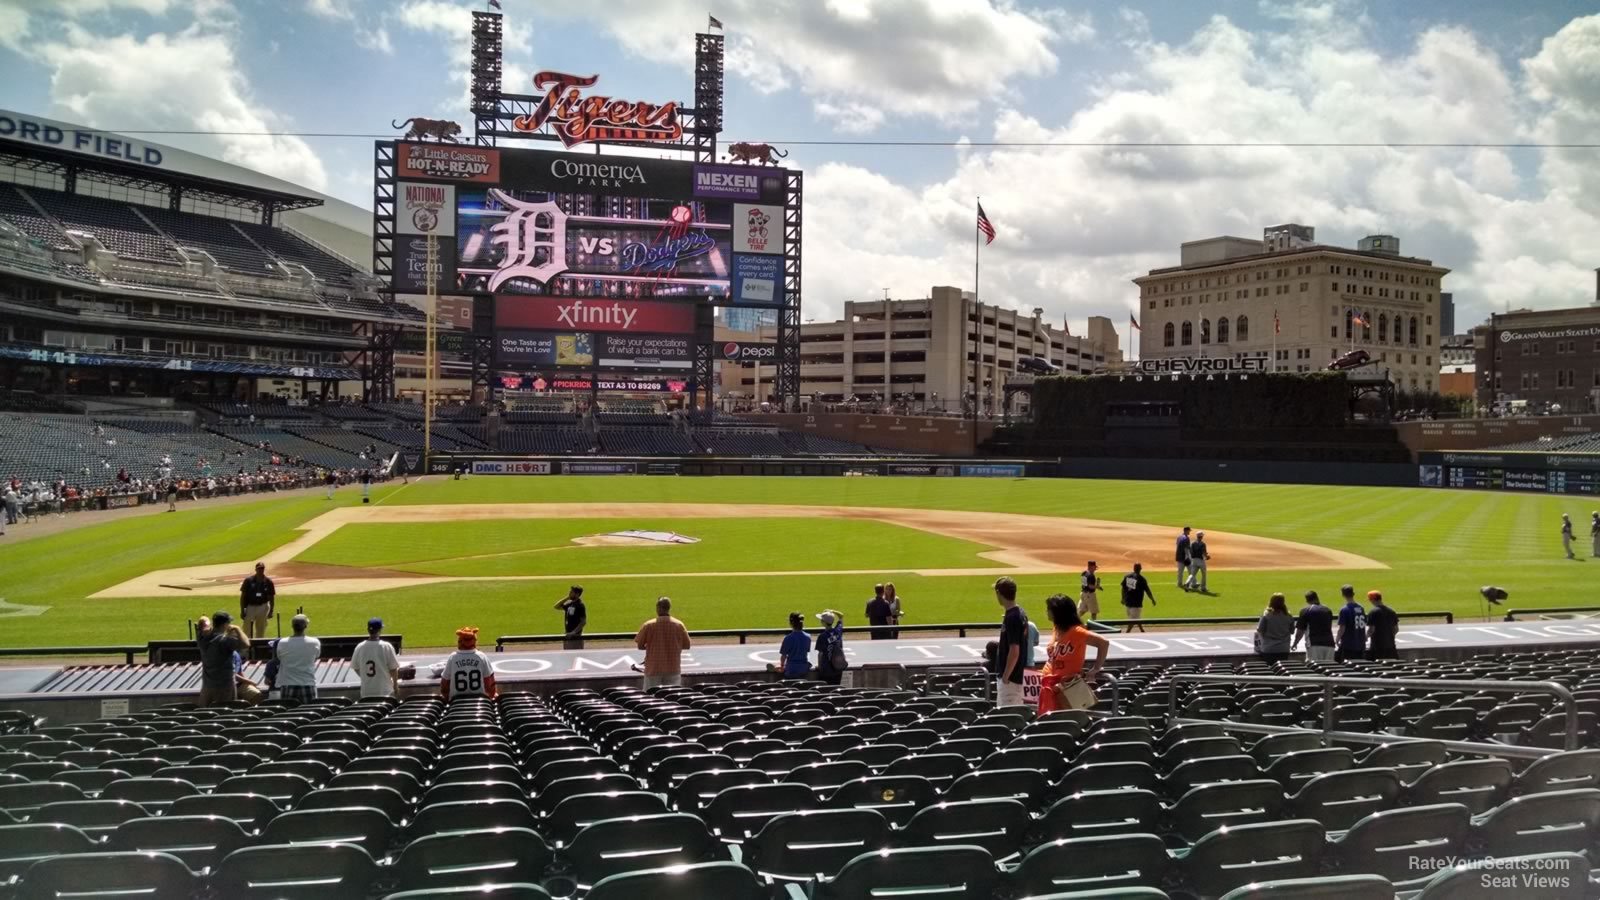 Detroit Tigers Comerica Park Seating Chart & Interactive Map ...